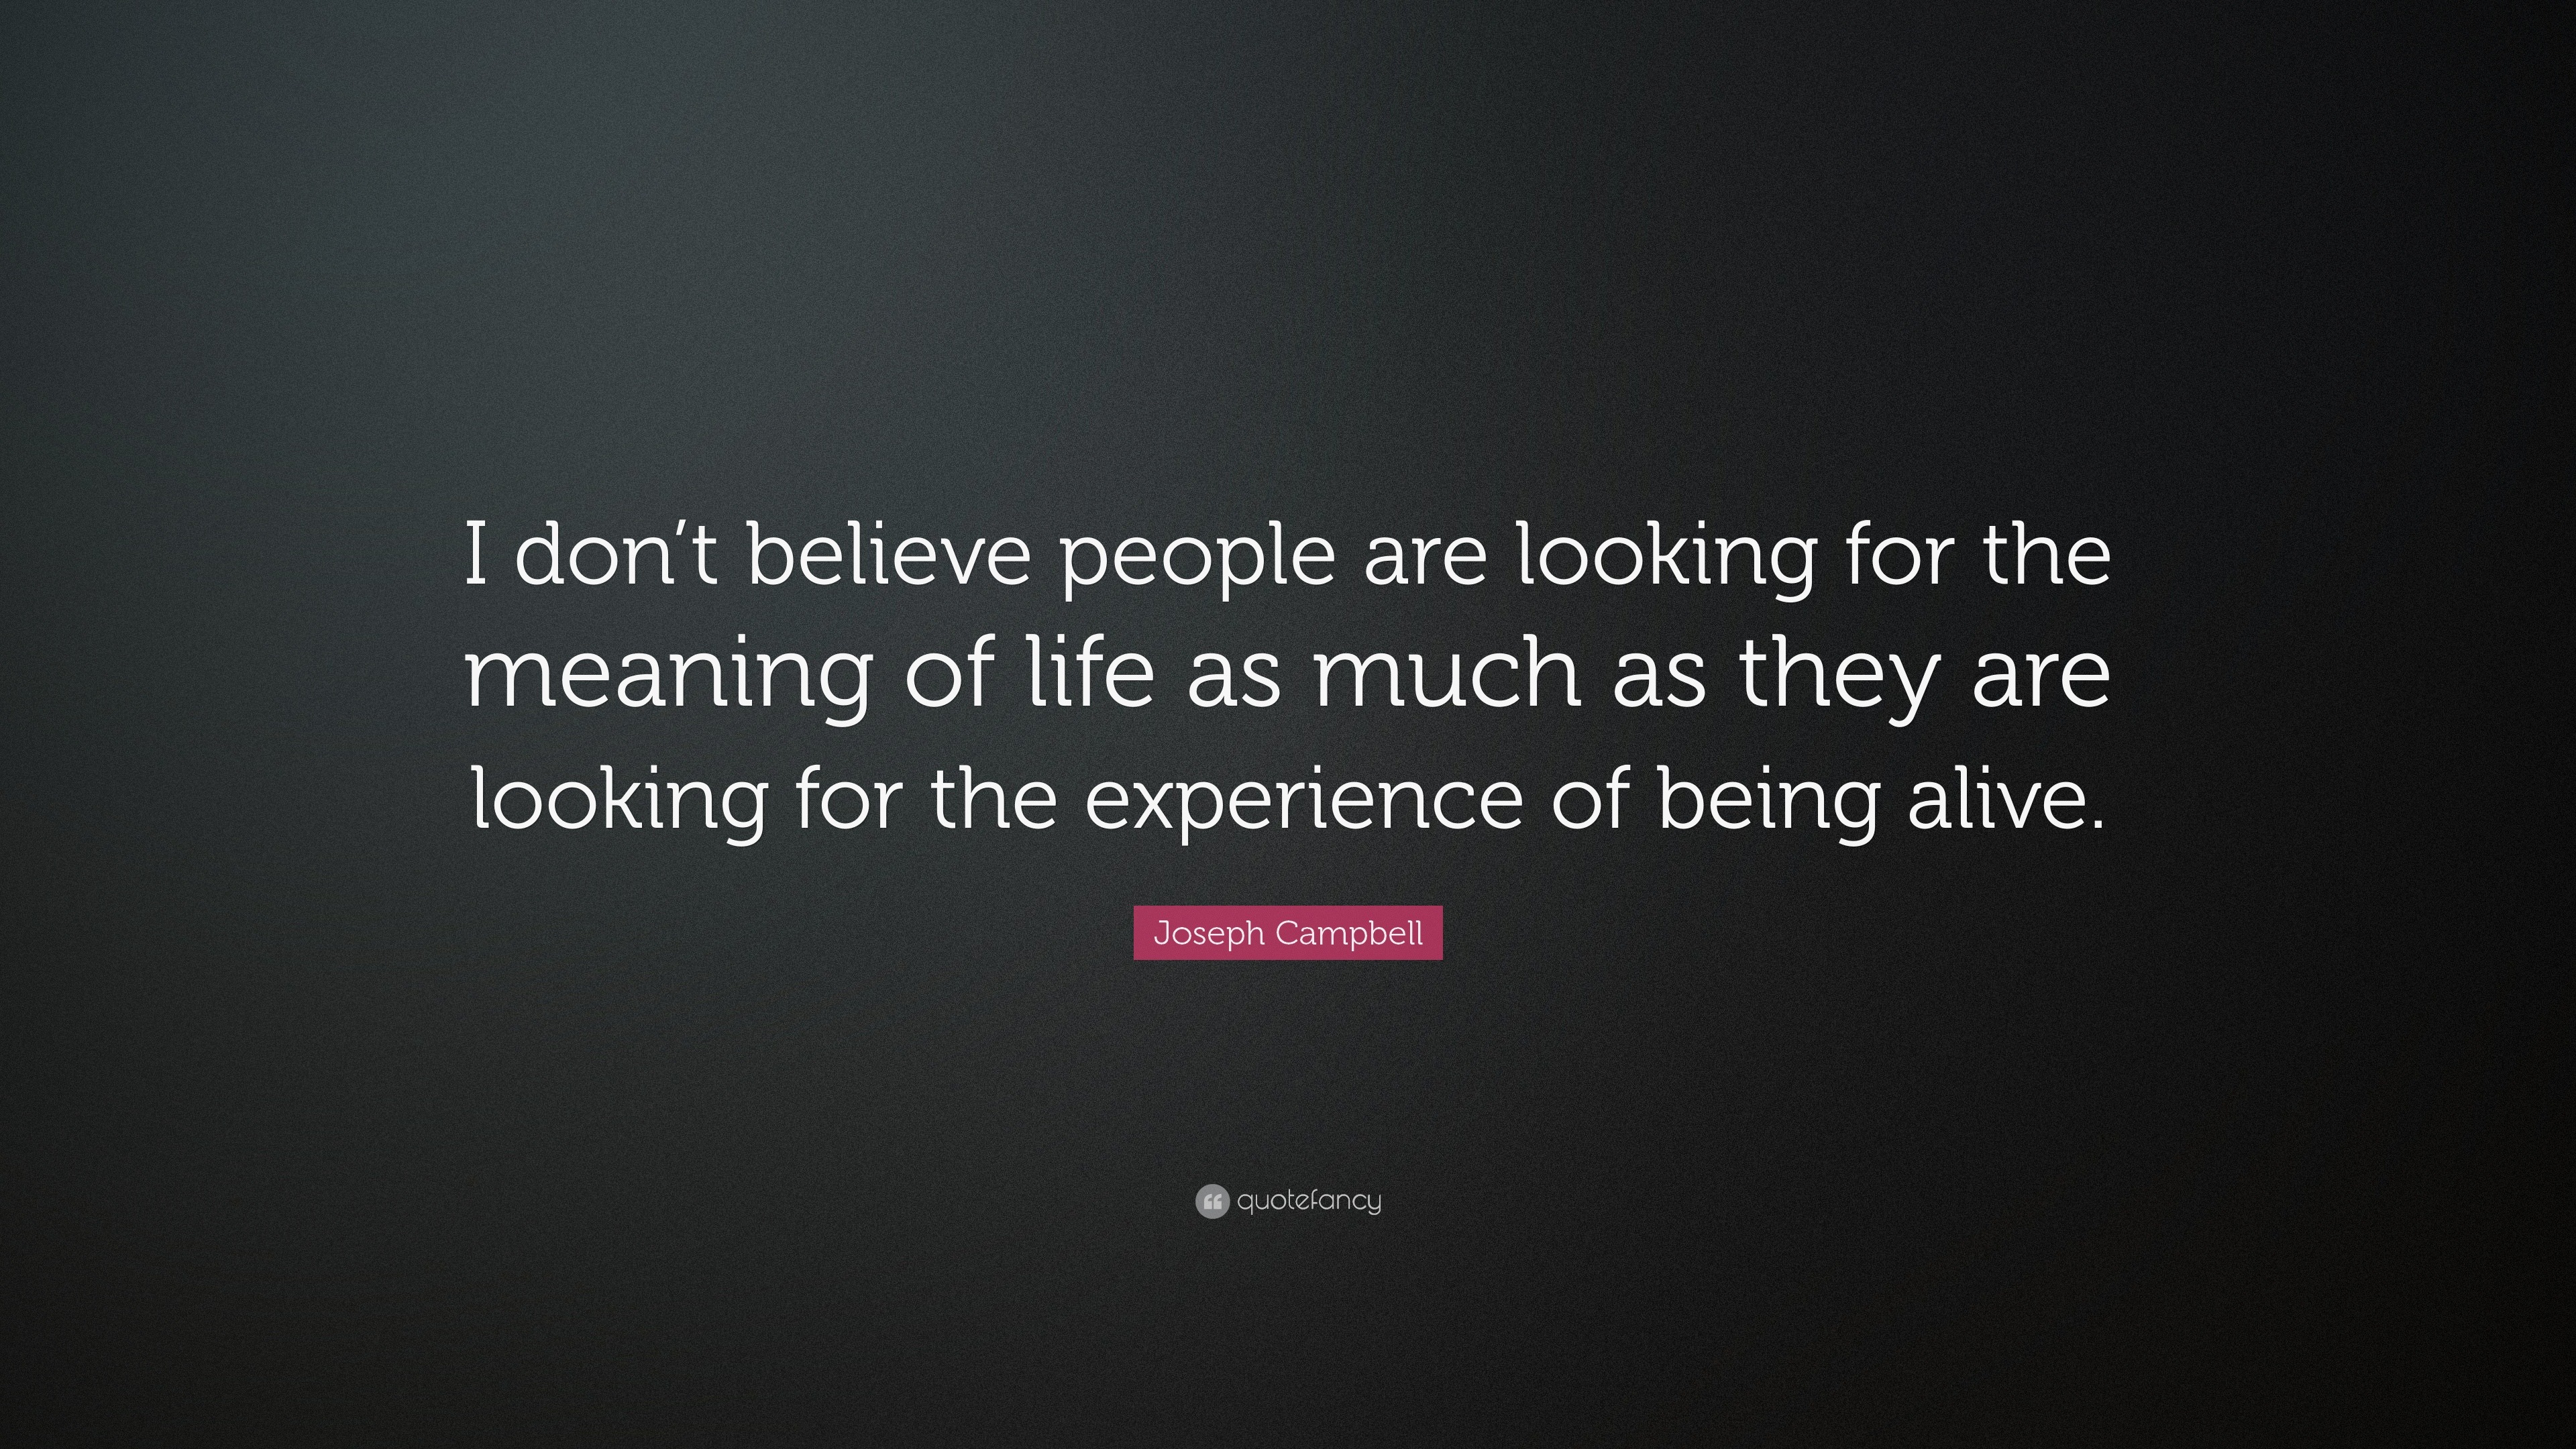 Joseph Campbell Quote: “I don’t believe people are looking for the ...